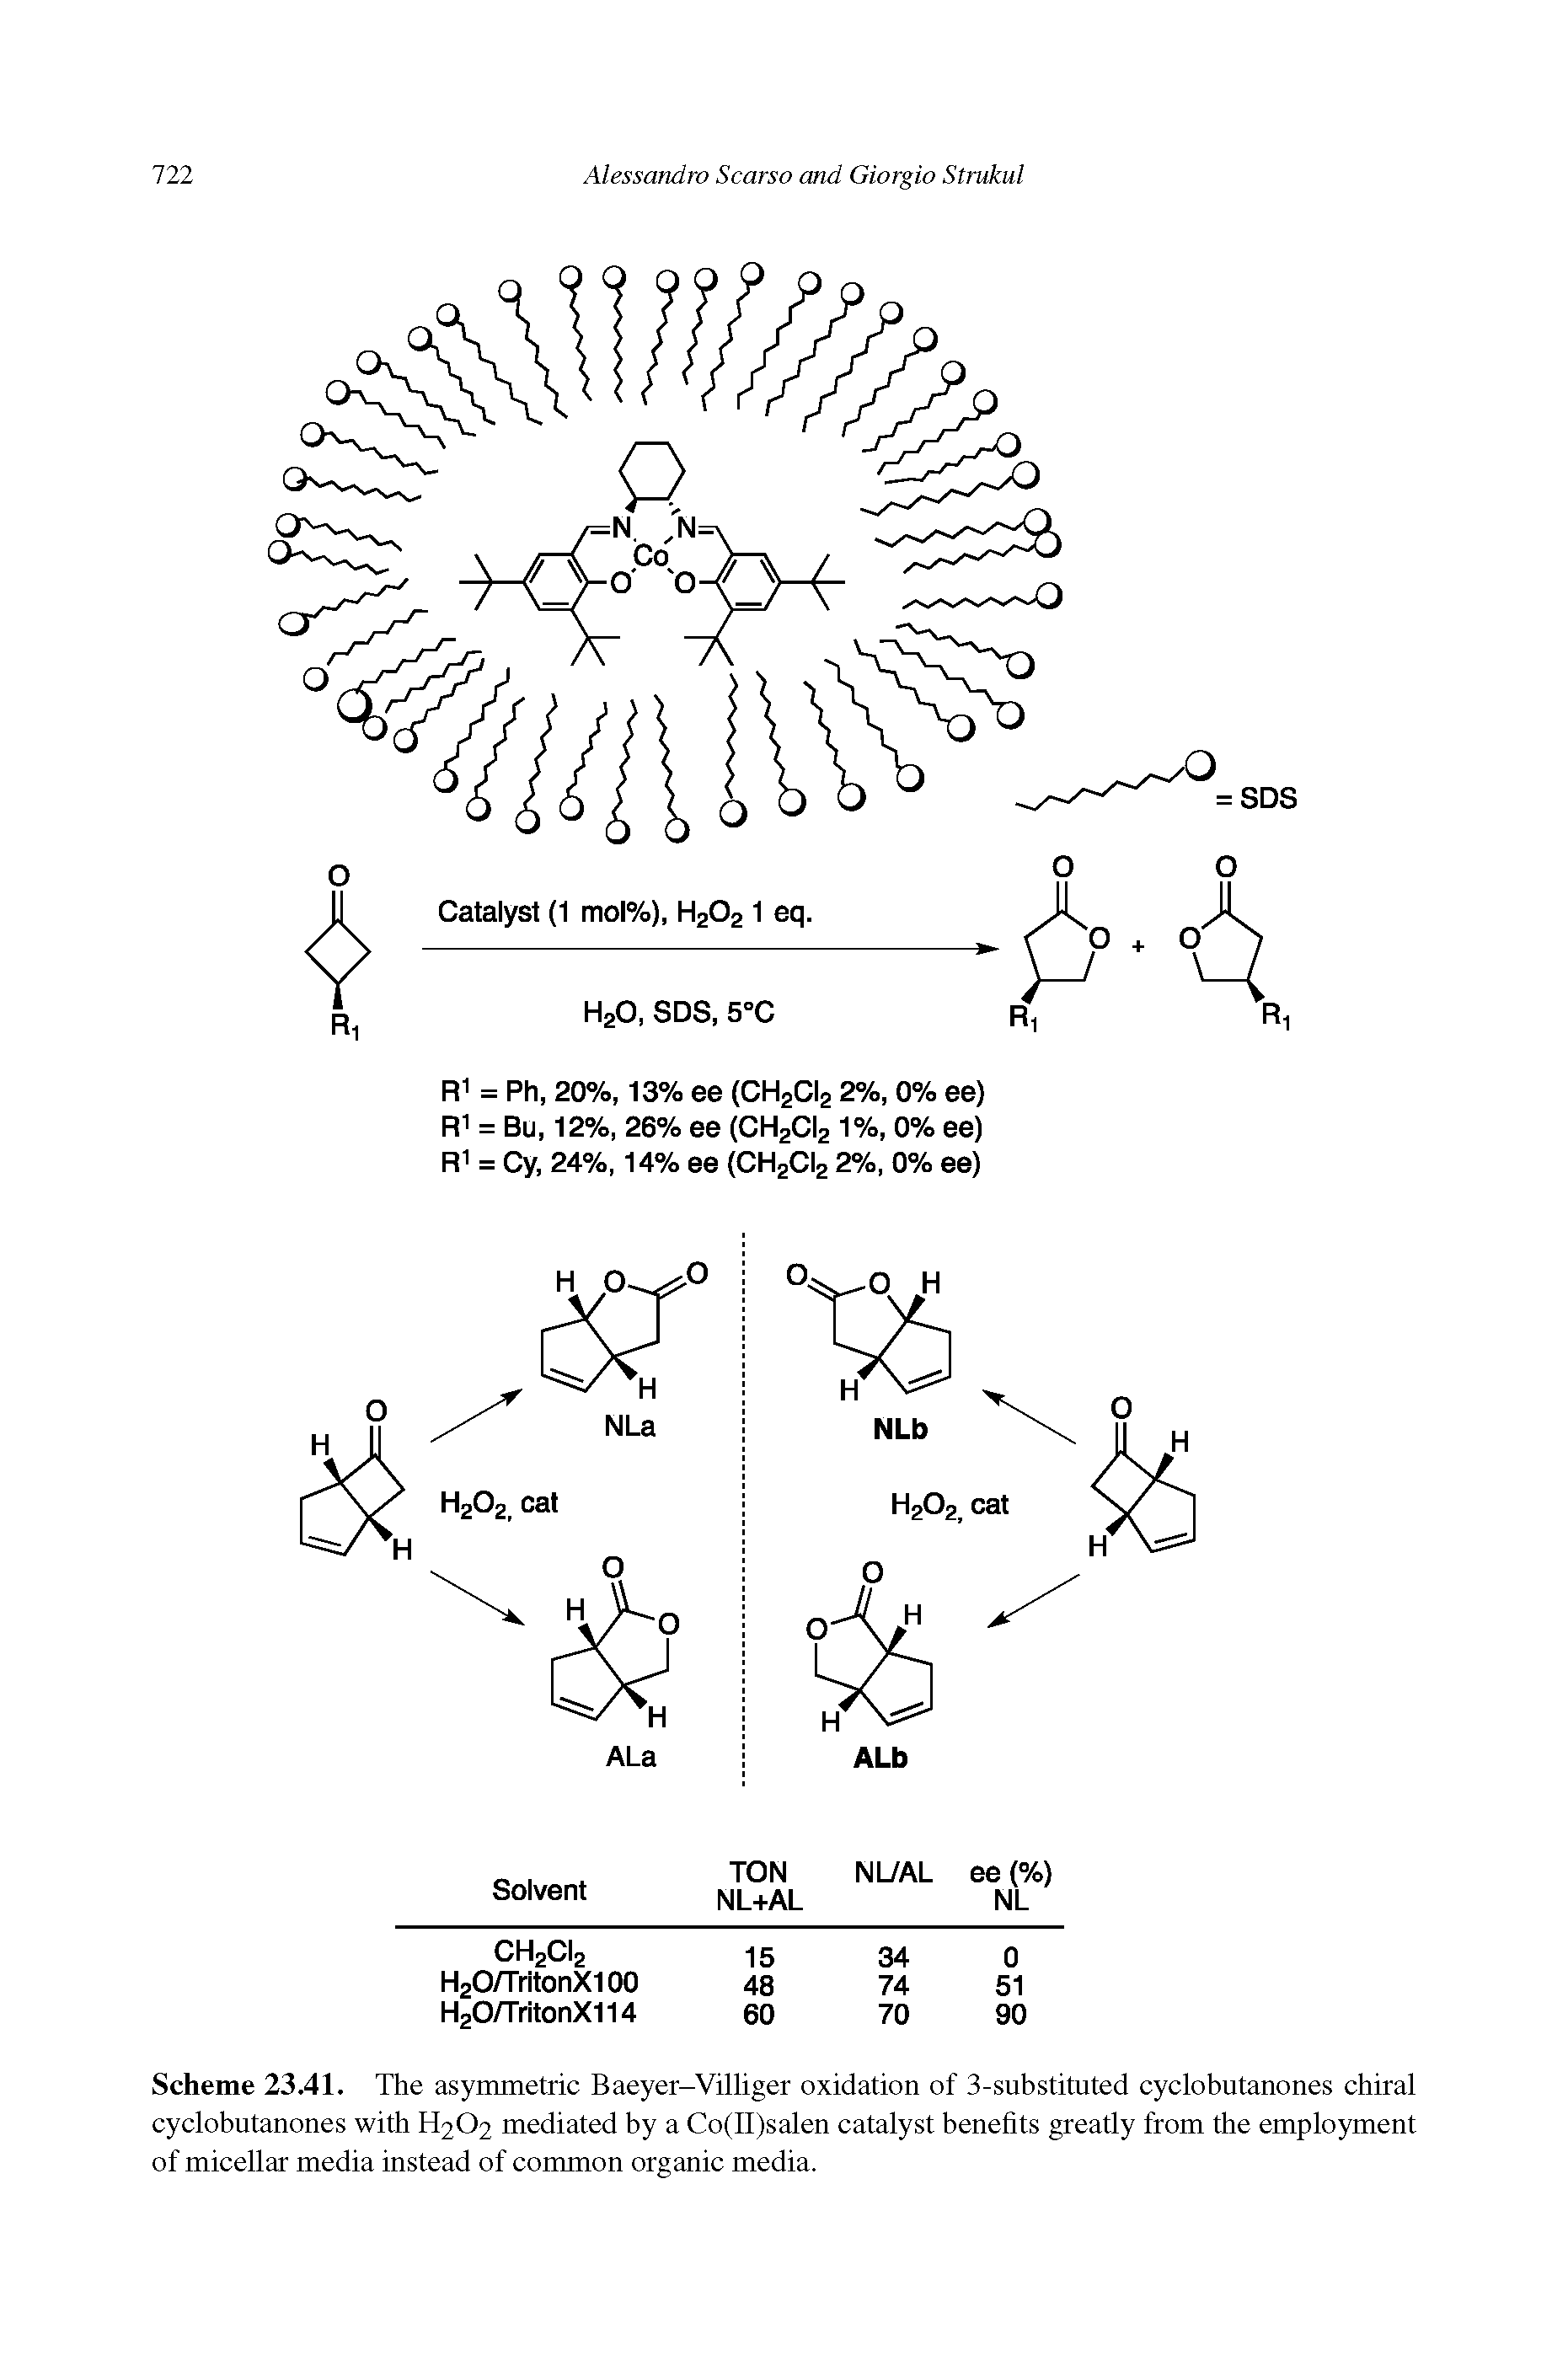 Scheme 23.41. The asymmetric Baeyer-Villiger oxidation of 3-substituted cyclobutanones chiral cyclobutanones with H2O2 mediated by a Co(II)salen catalyst benefits greatly from the employment of micellar media instead of common organic media.